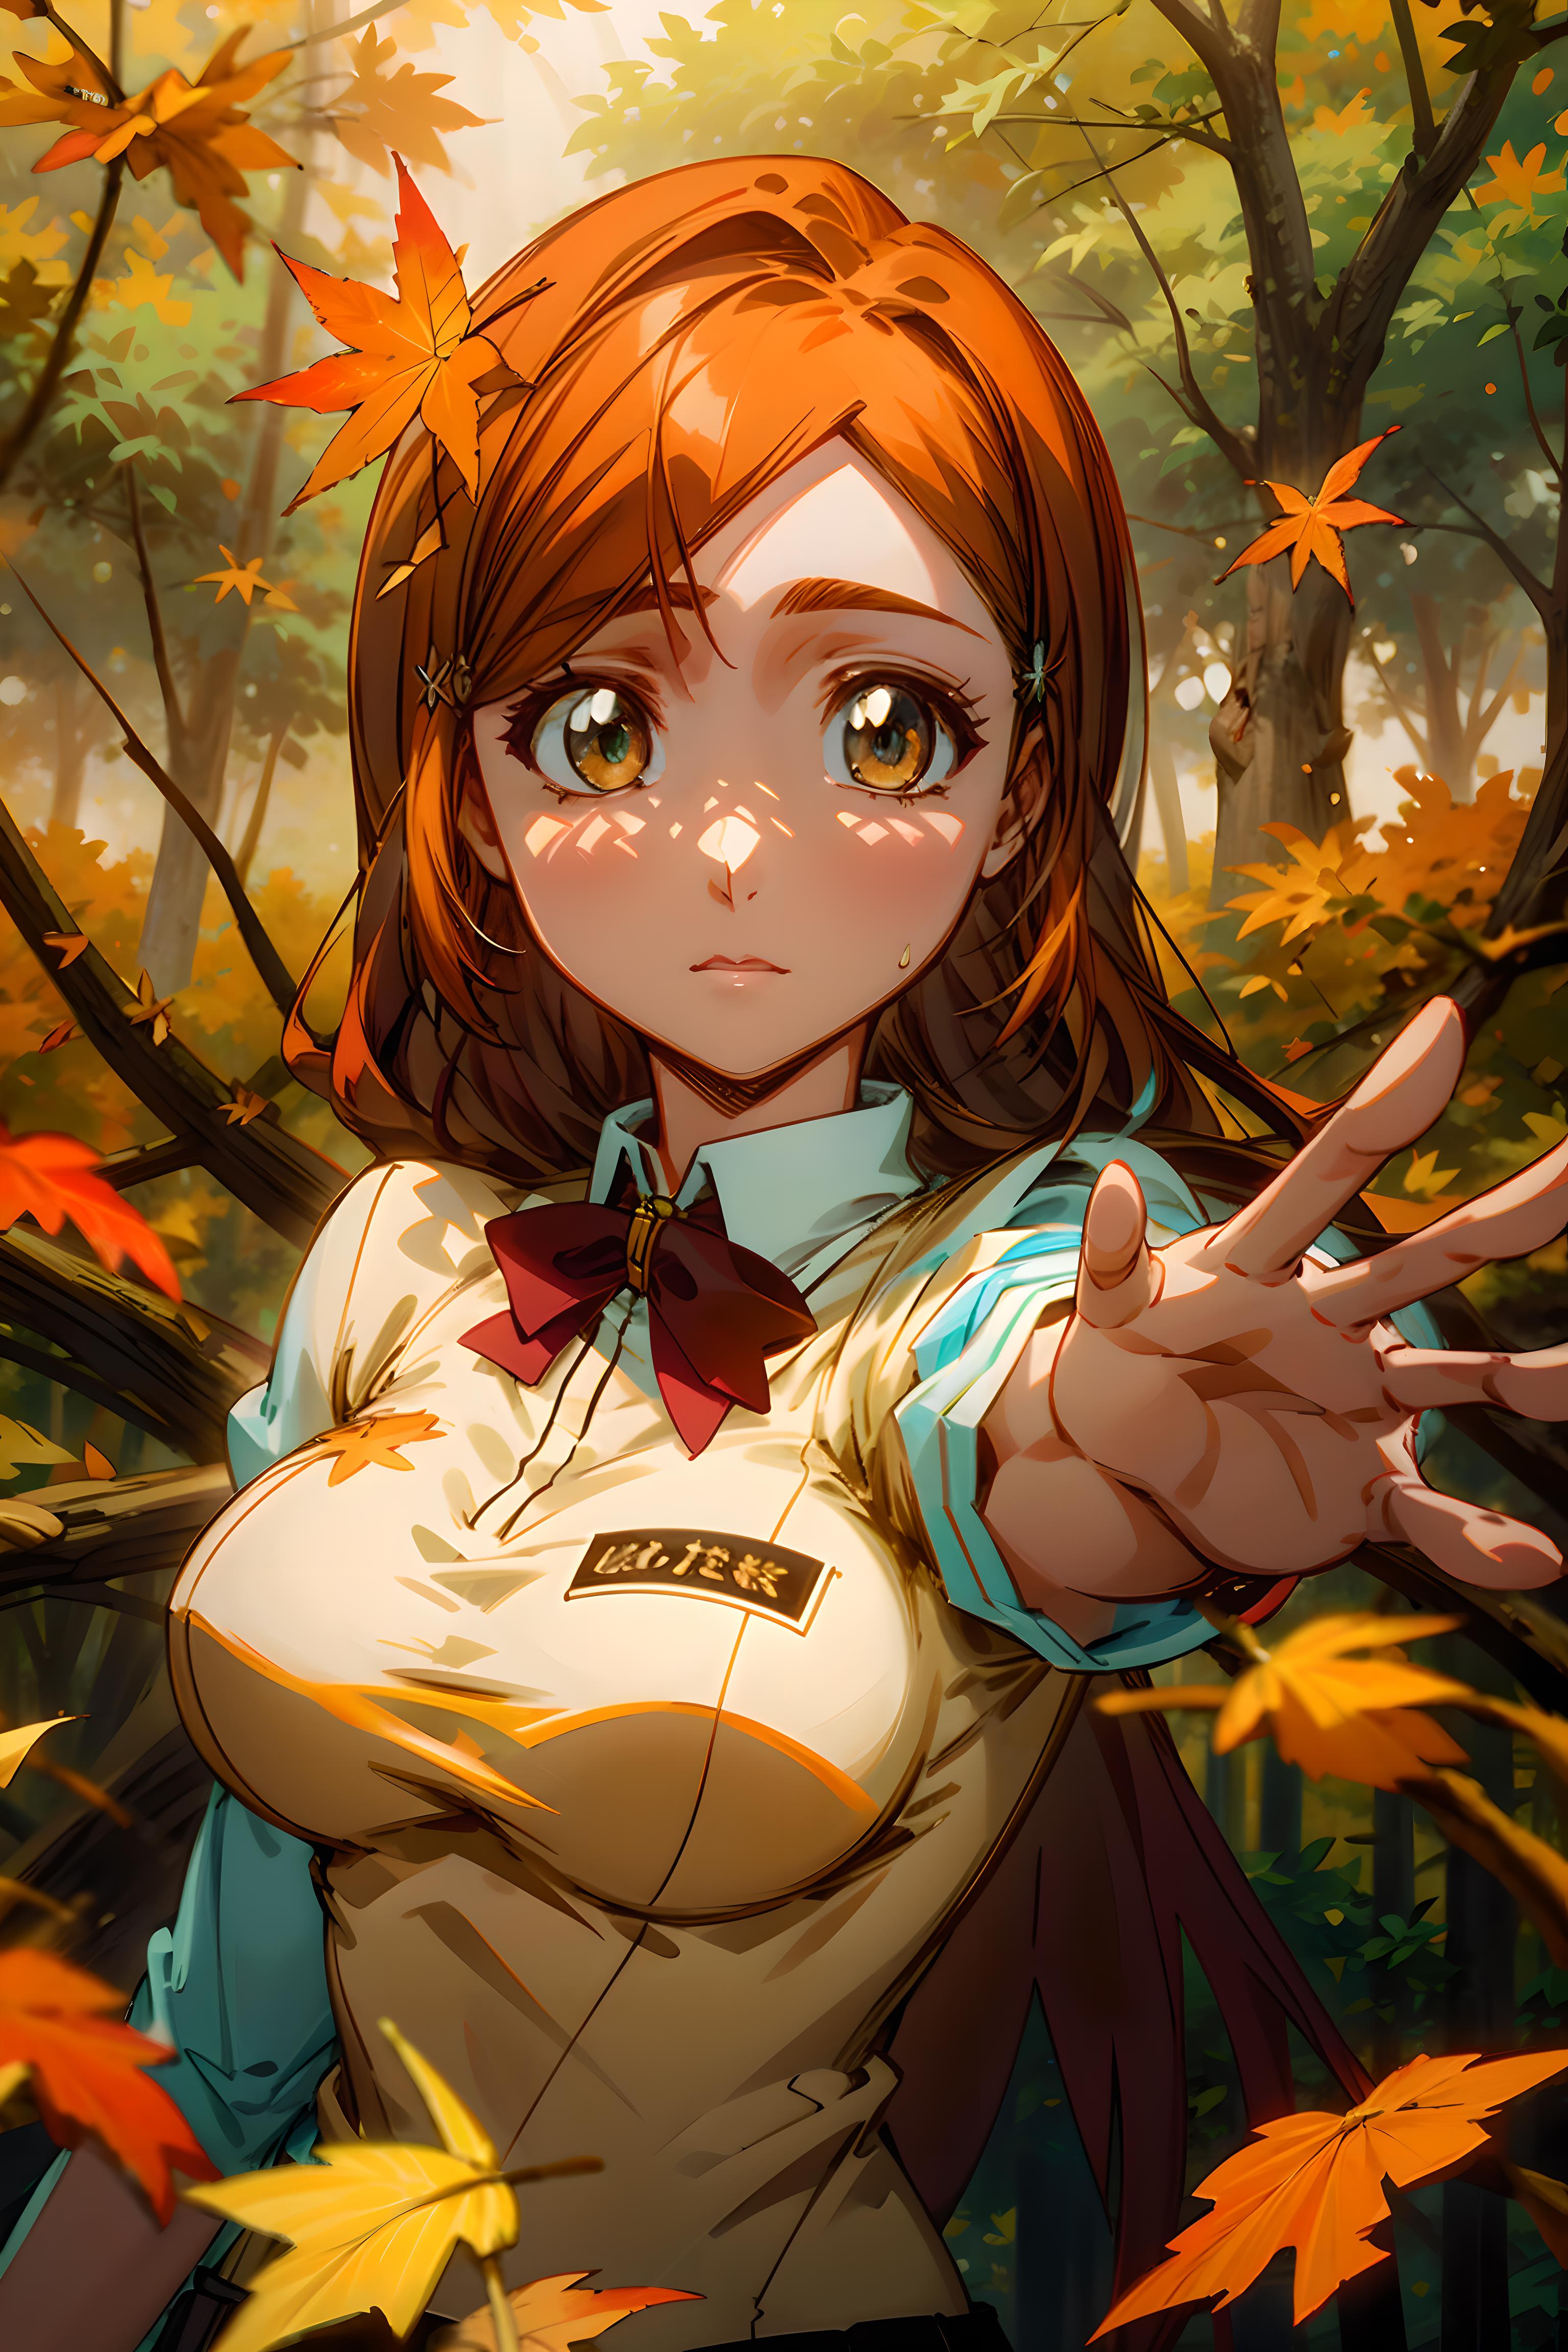 Inoue Orihime (from Bleach) image by sixsstitan